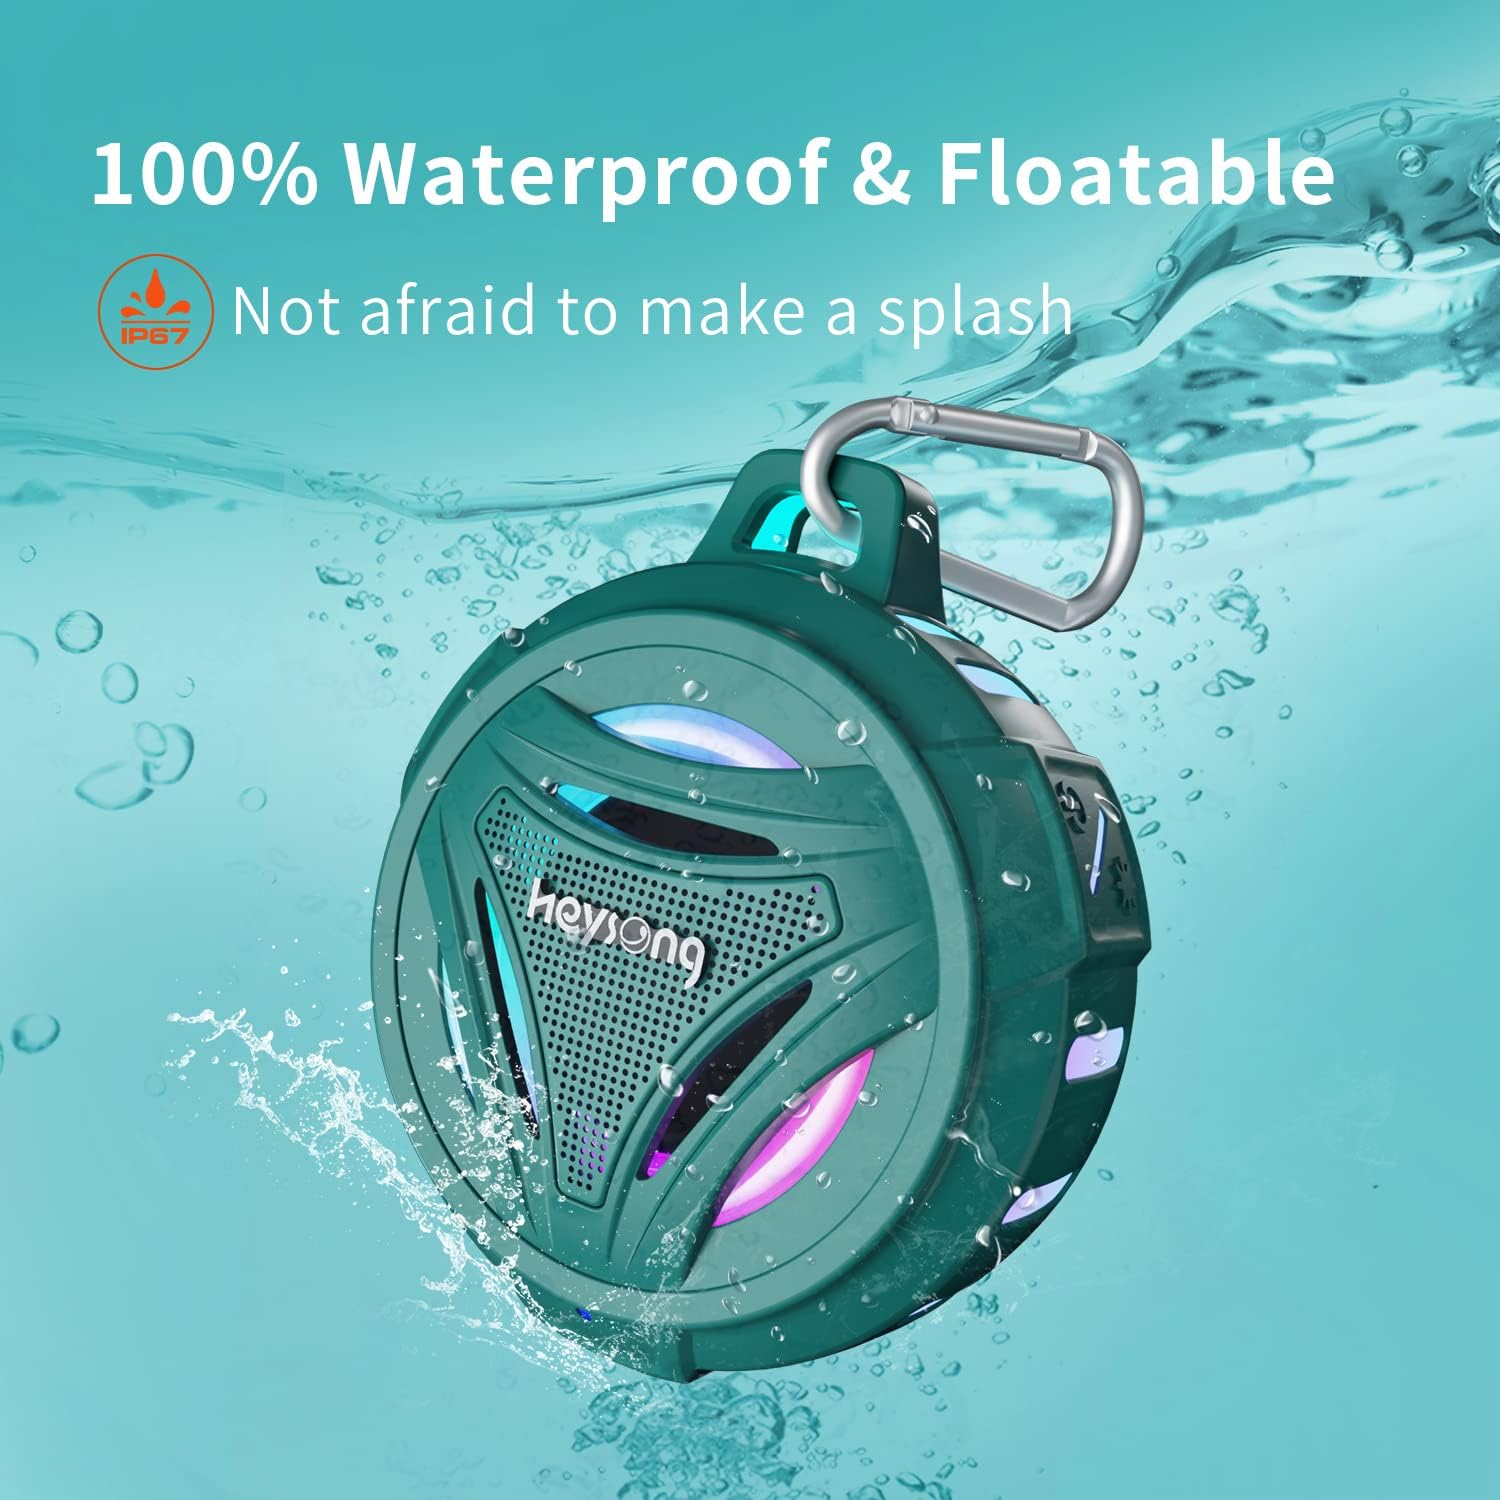 HEYSONG Waterproof Shower Speaker, Portable Bluetooth Speakers with LED Light, IP67, 36H Playtime, Rich Bass Speakers Bluetooth Wireless for Sports, Outdoors, Kayak, Beach, Travel, Gifts for Men